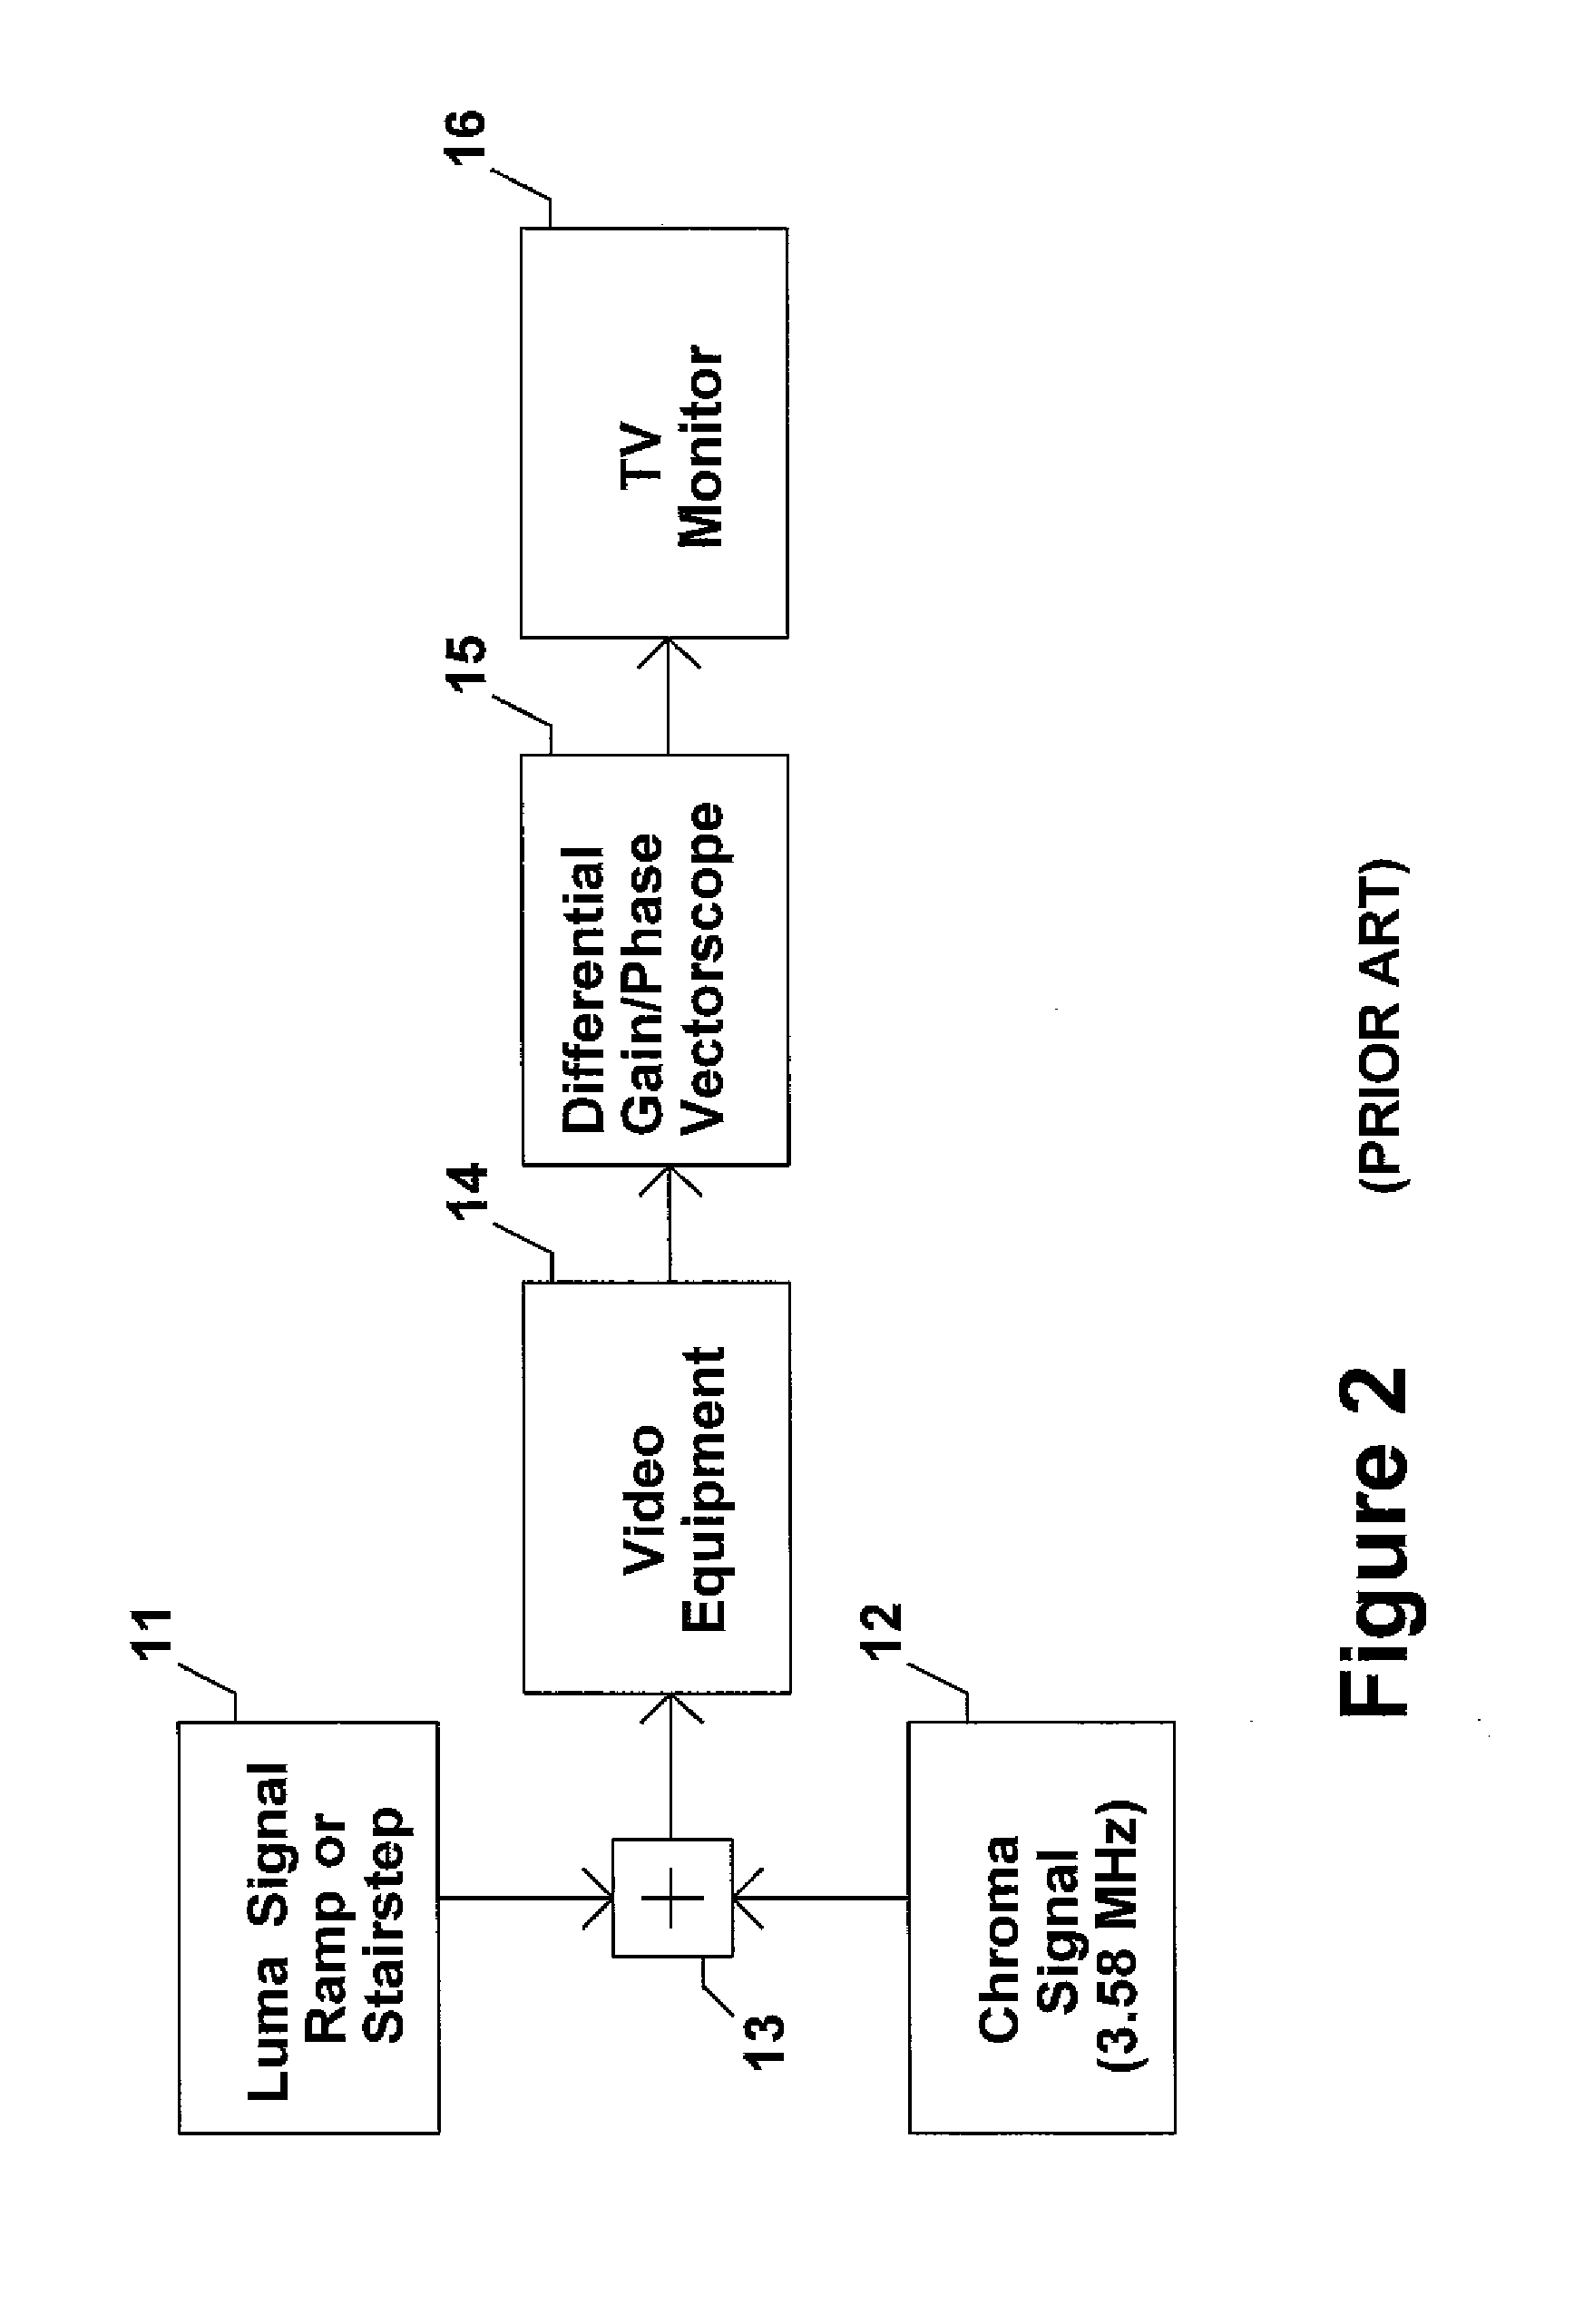 Method and apparatus to measure differential phase and frequency modulation distortions for audio equipment